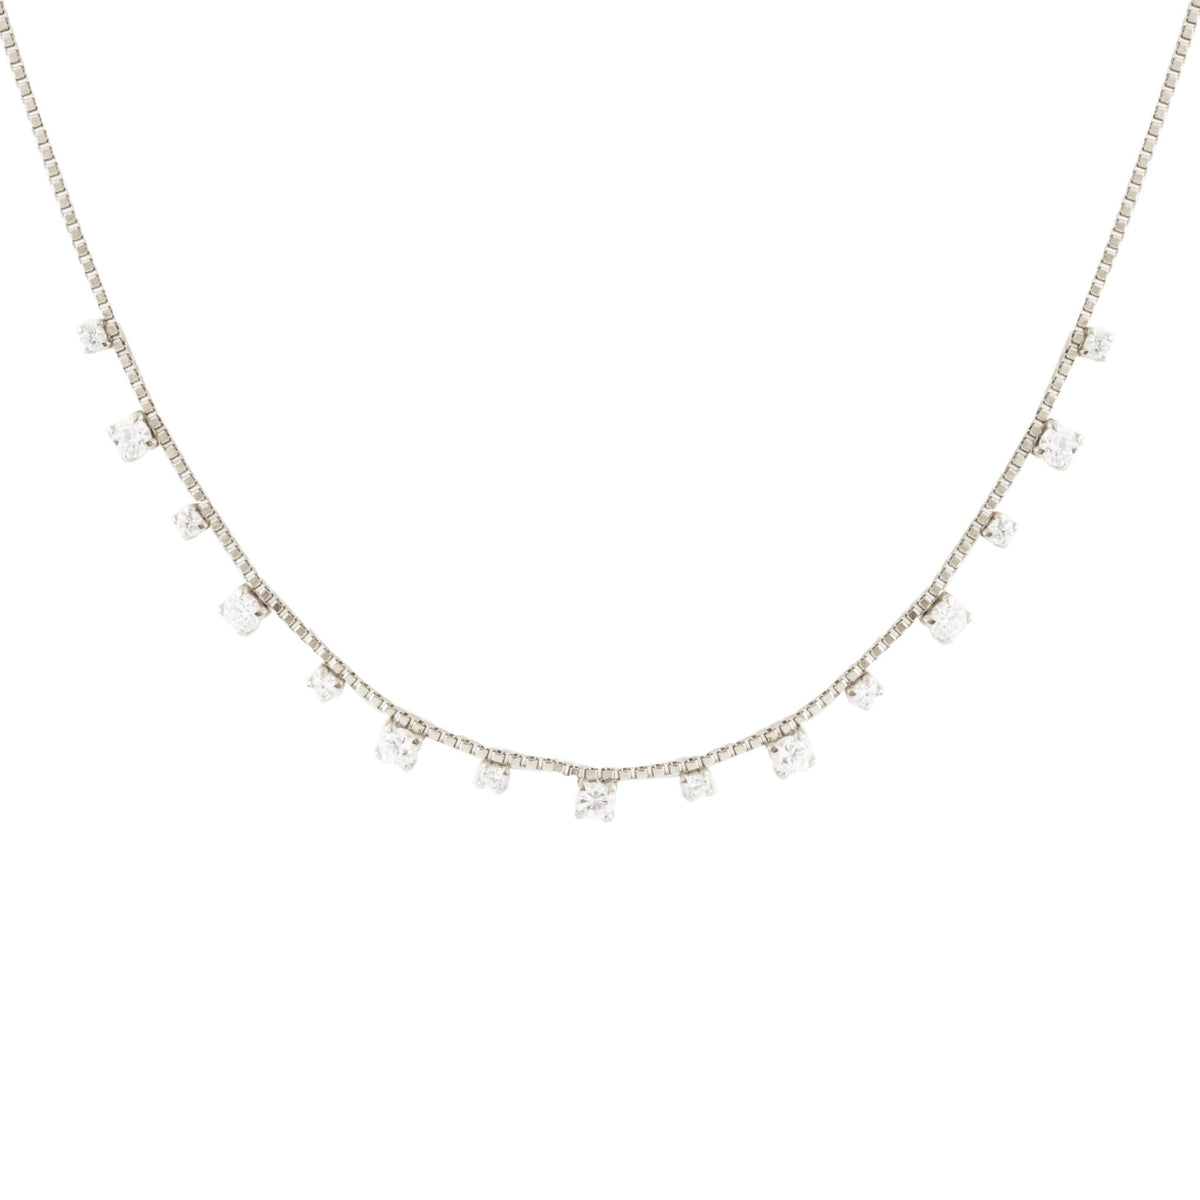 SCATTERED LOVE COLLAR NECKLACE - CUBIC ZIRCONIA &amp; SILVER - SO PRETTY CARA COTTER